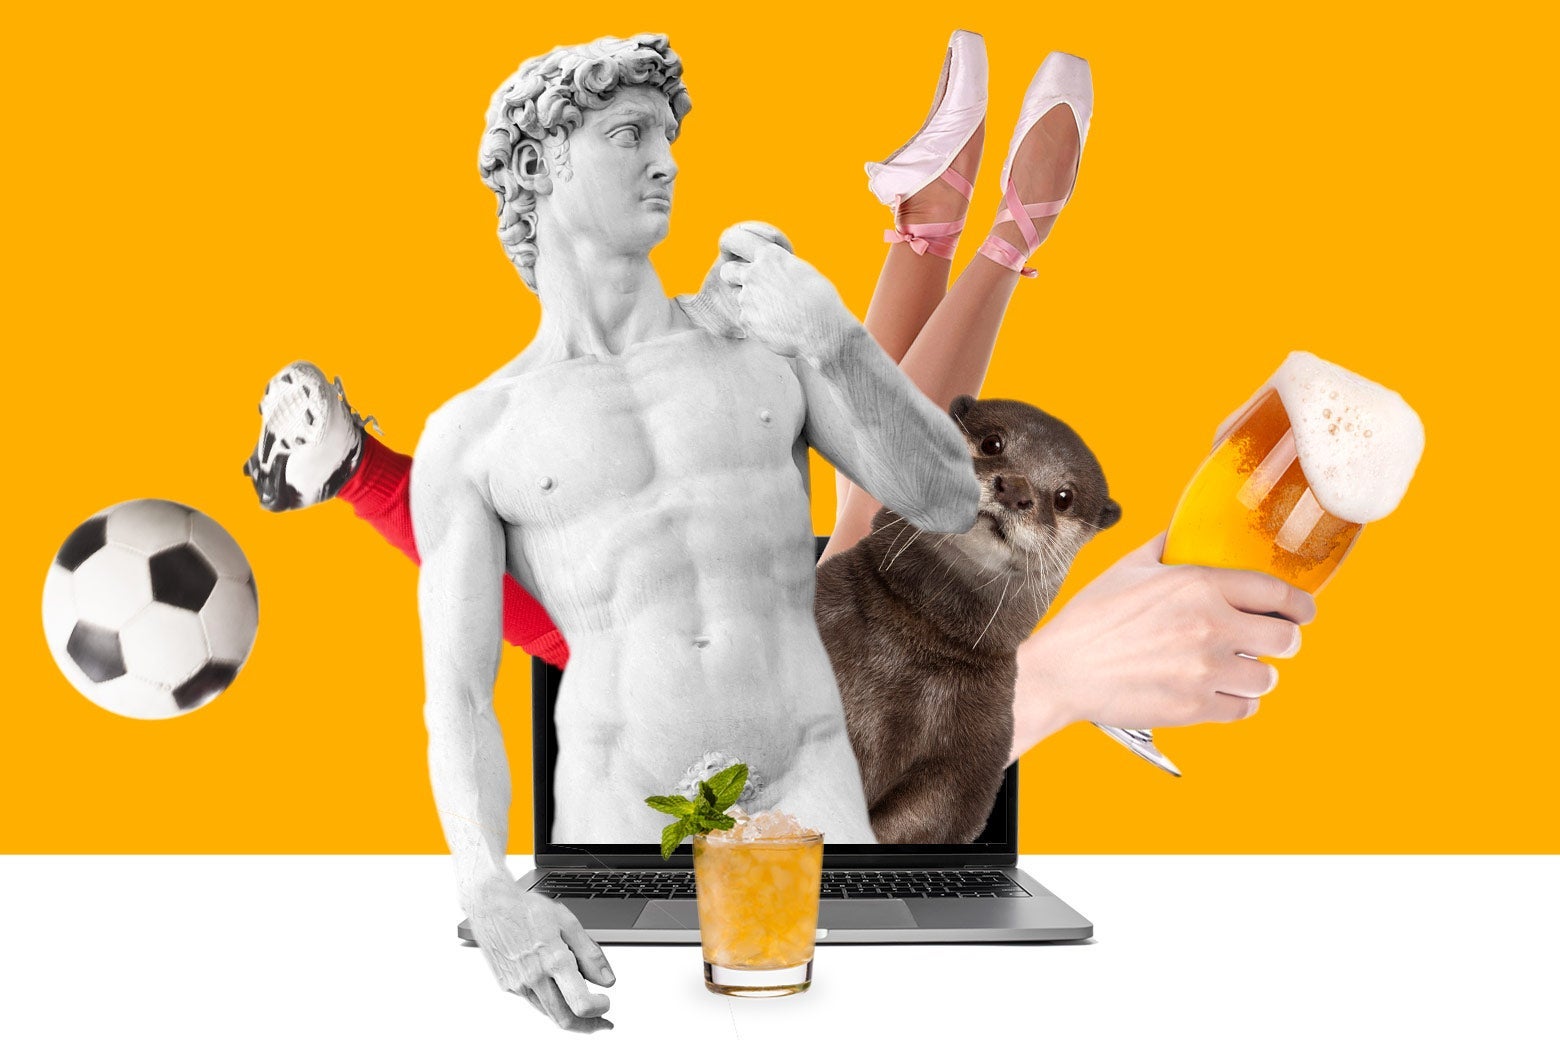 A soccer player, a statue, an otter, a ballet dancer, a hand proffering a beer, and a cocktail emerge from a laptop.